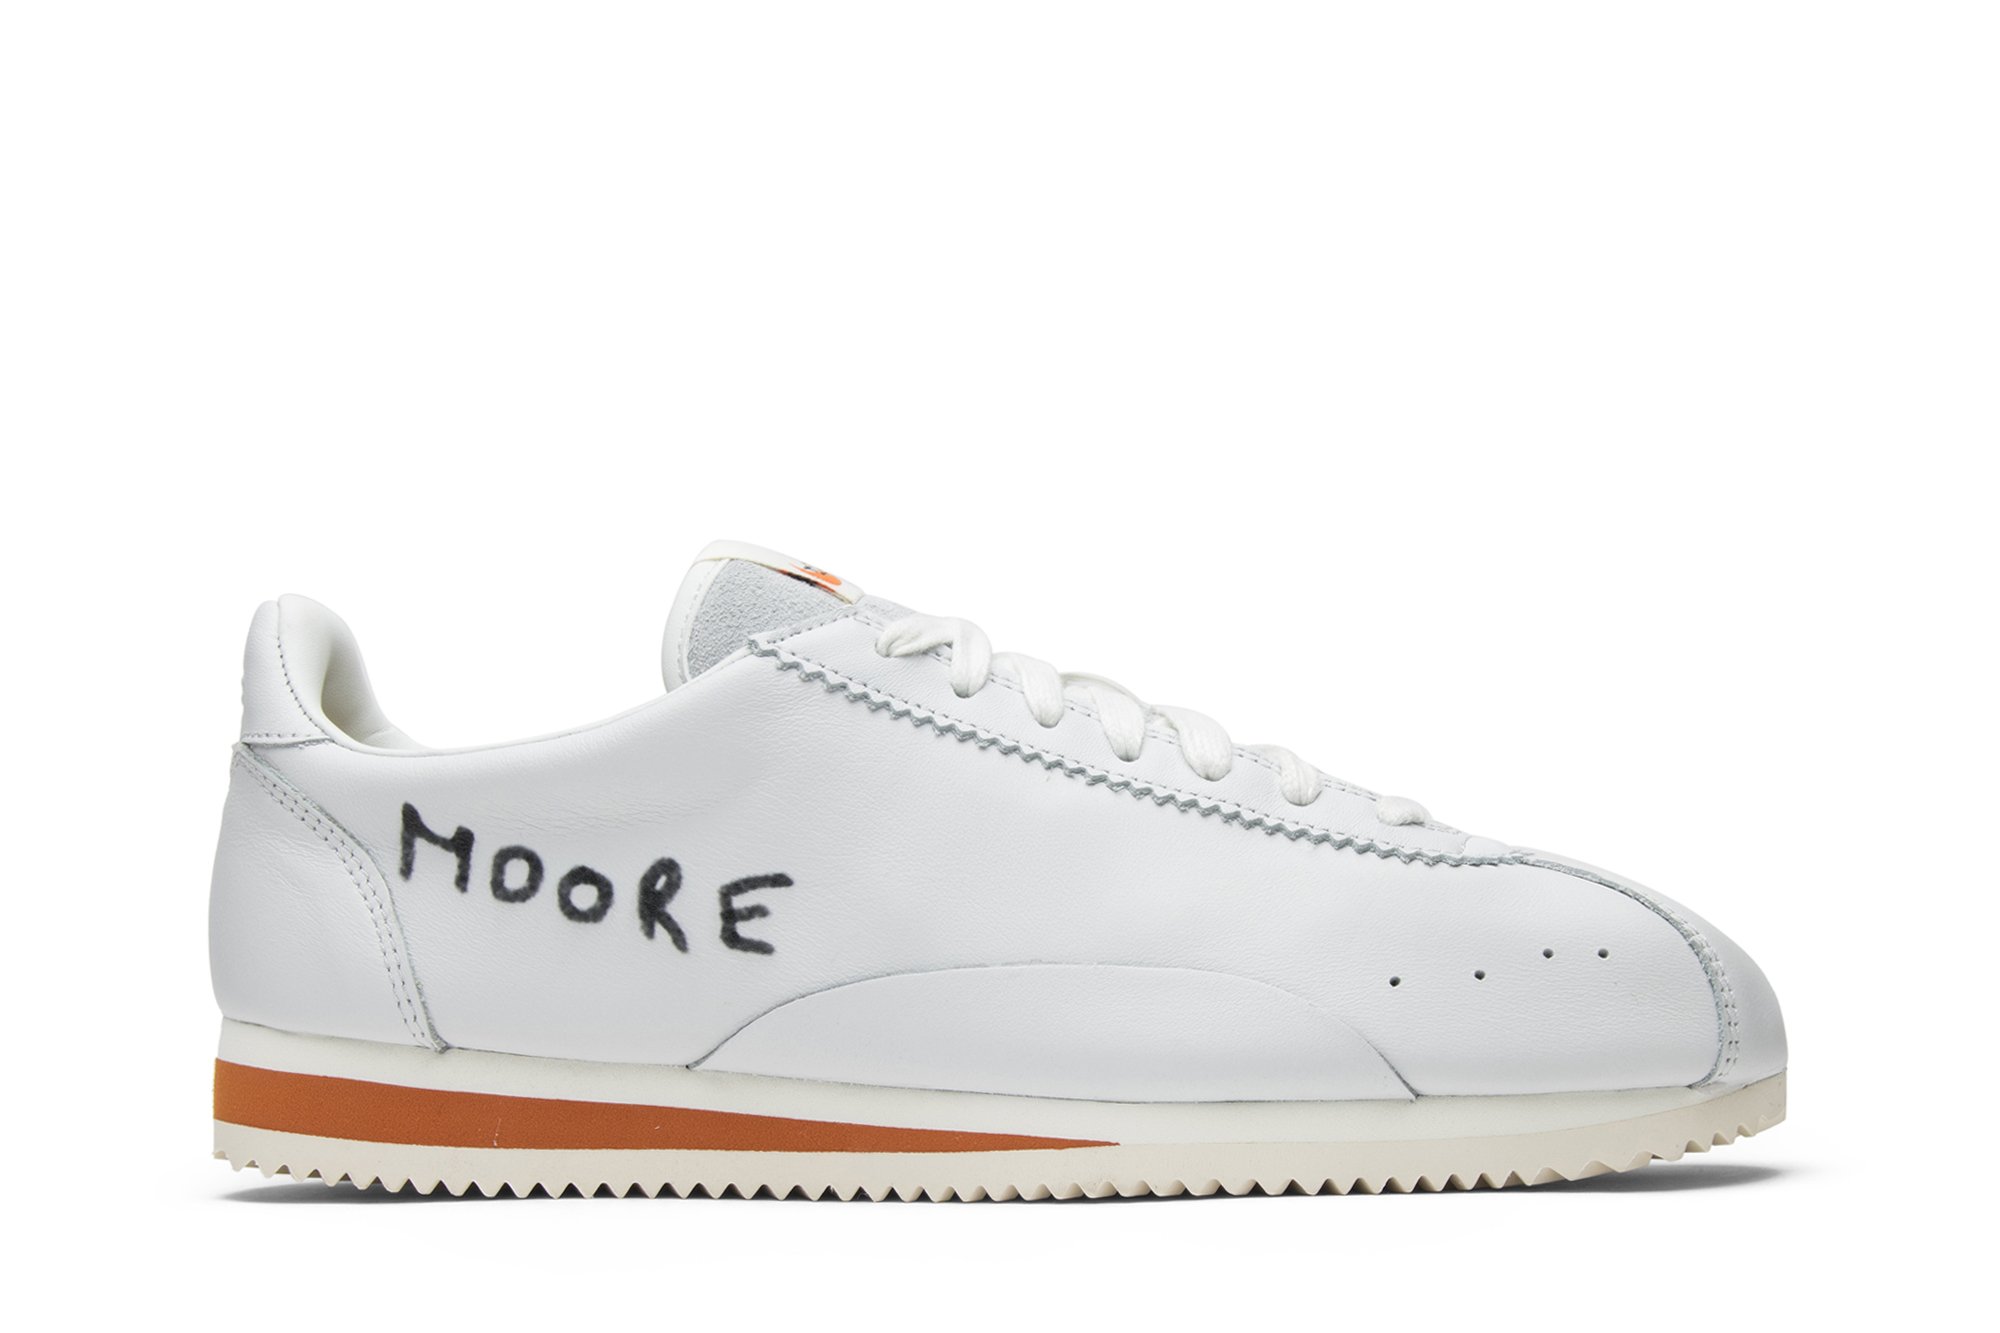 Buy Kenny Moore x Classic Cortez QS 'White' - 943088 100